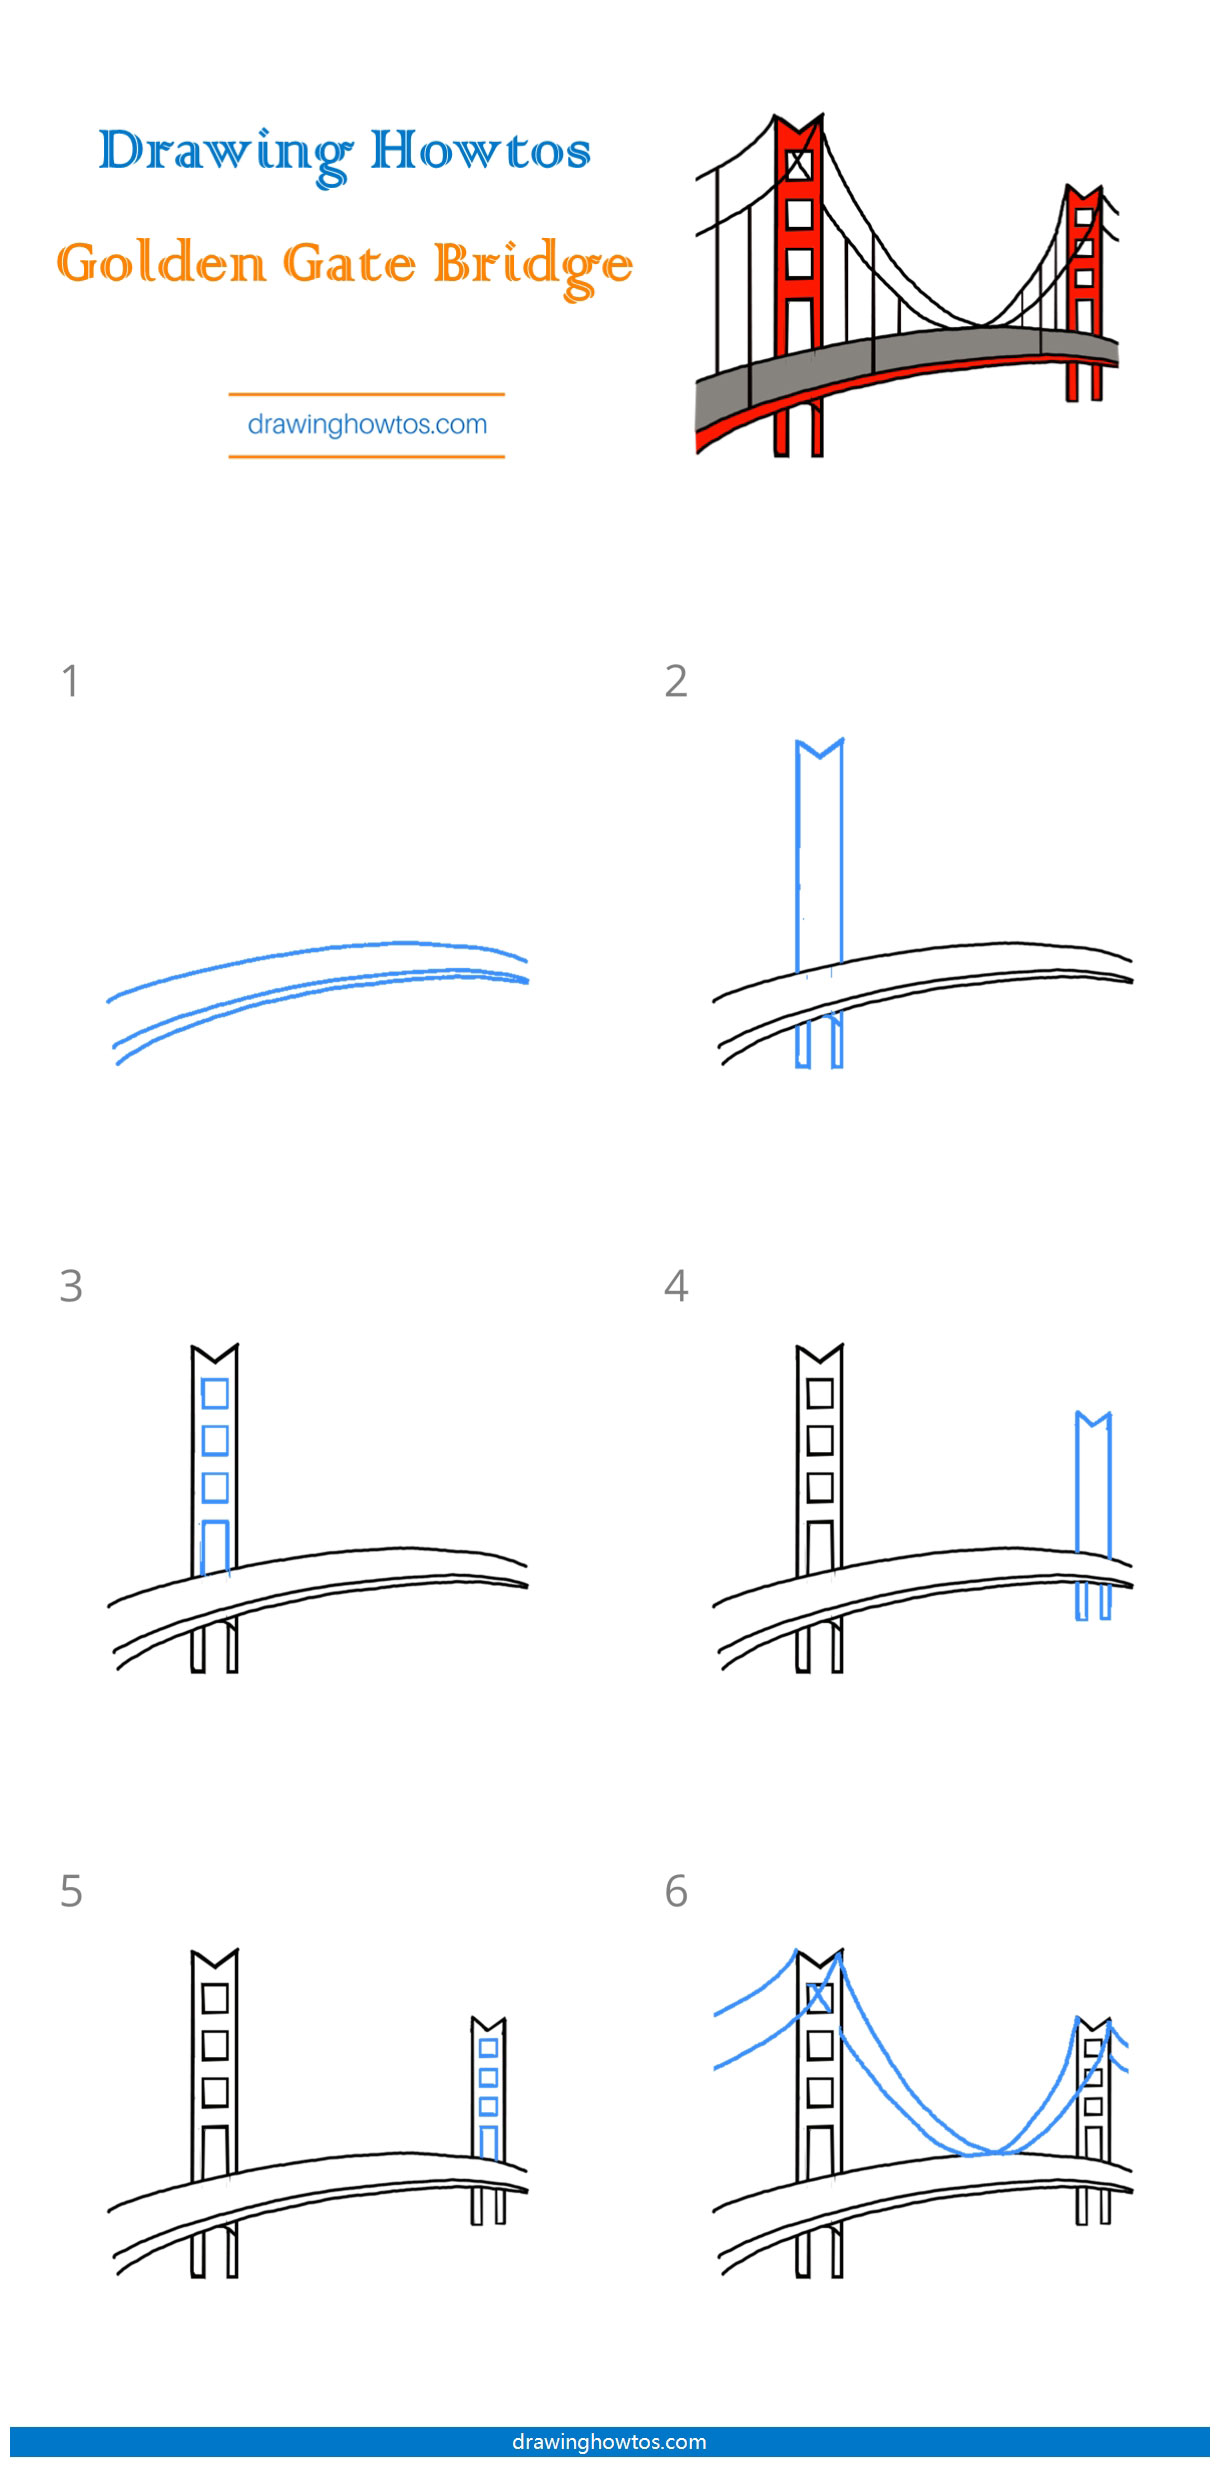 How to Draw the Golden Gate Bridge Step by Step